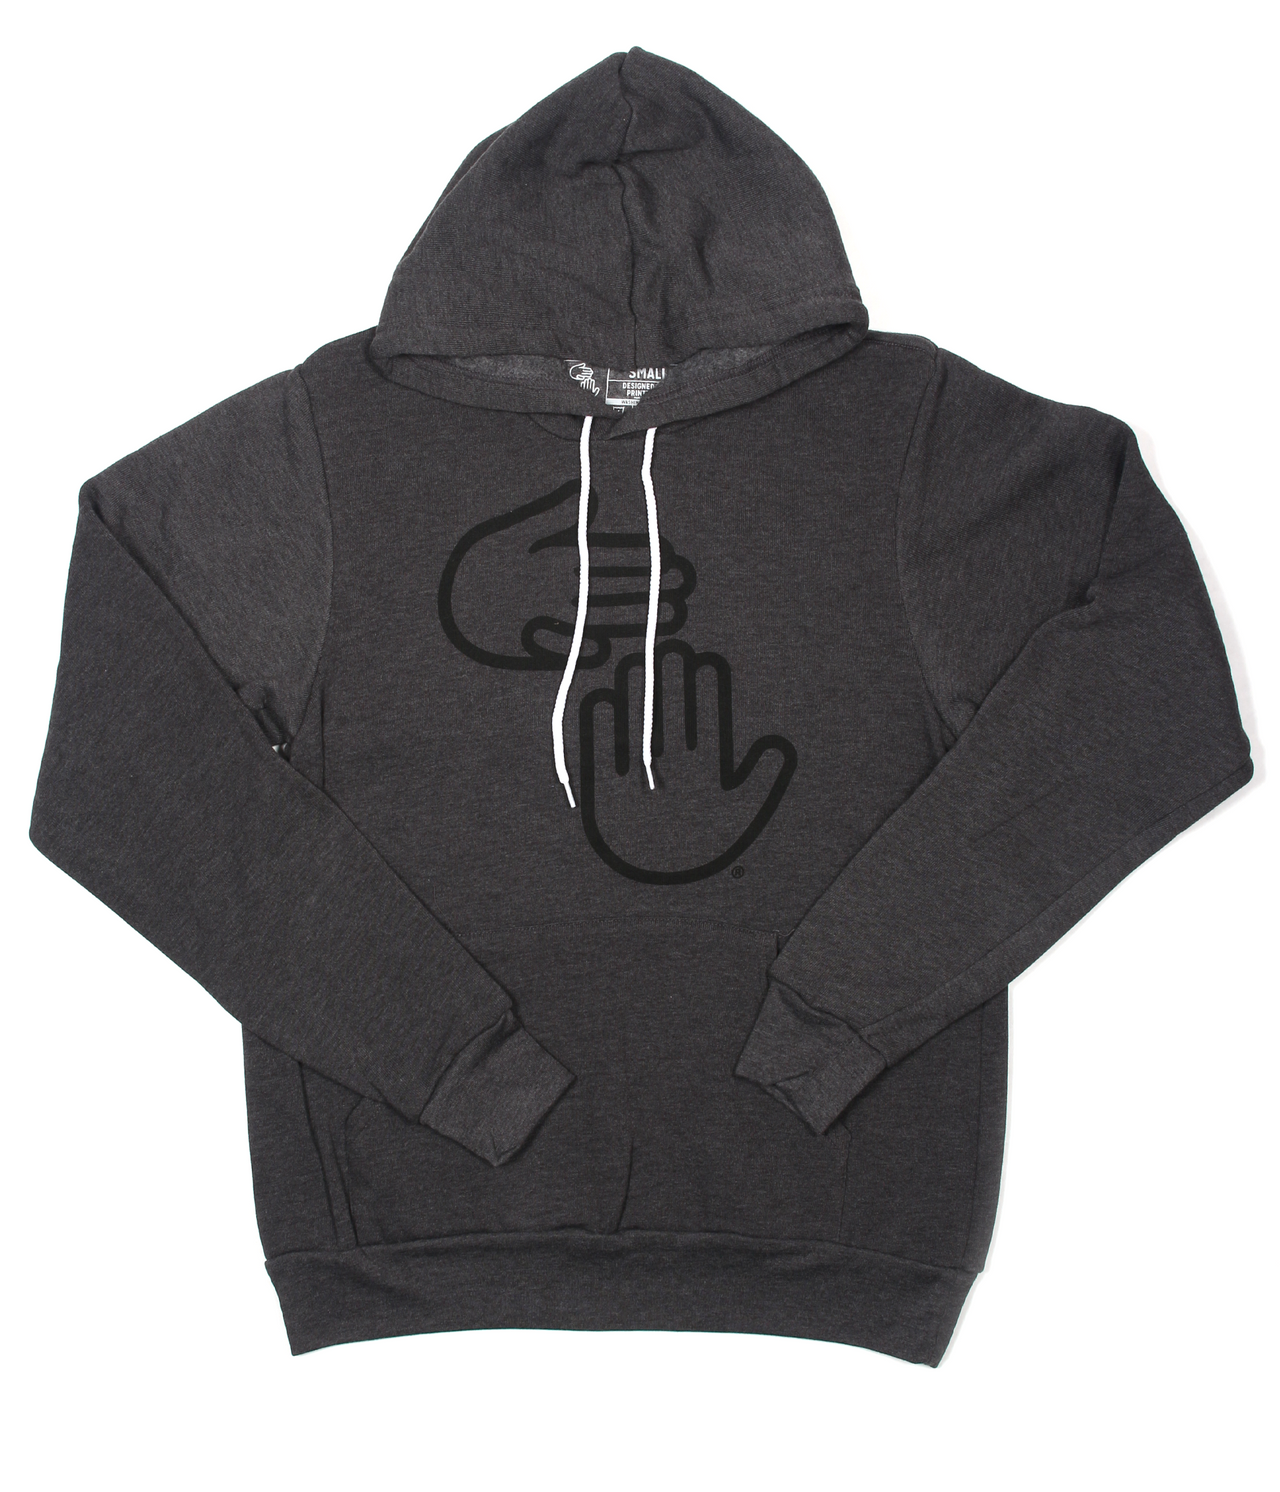 Michigan Hands Pullover Hoodie (Charcoal)